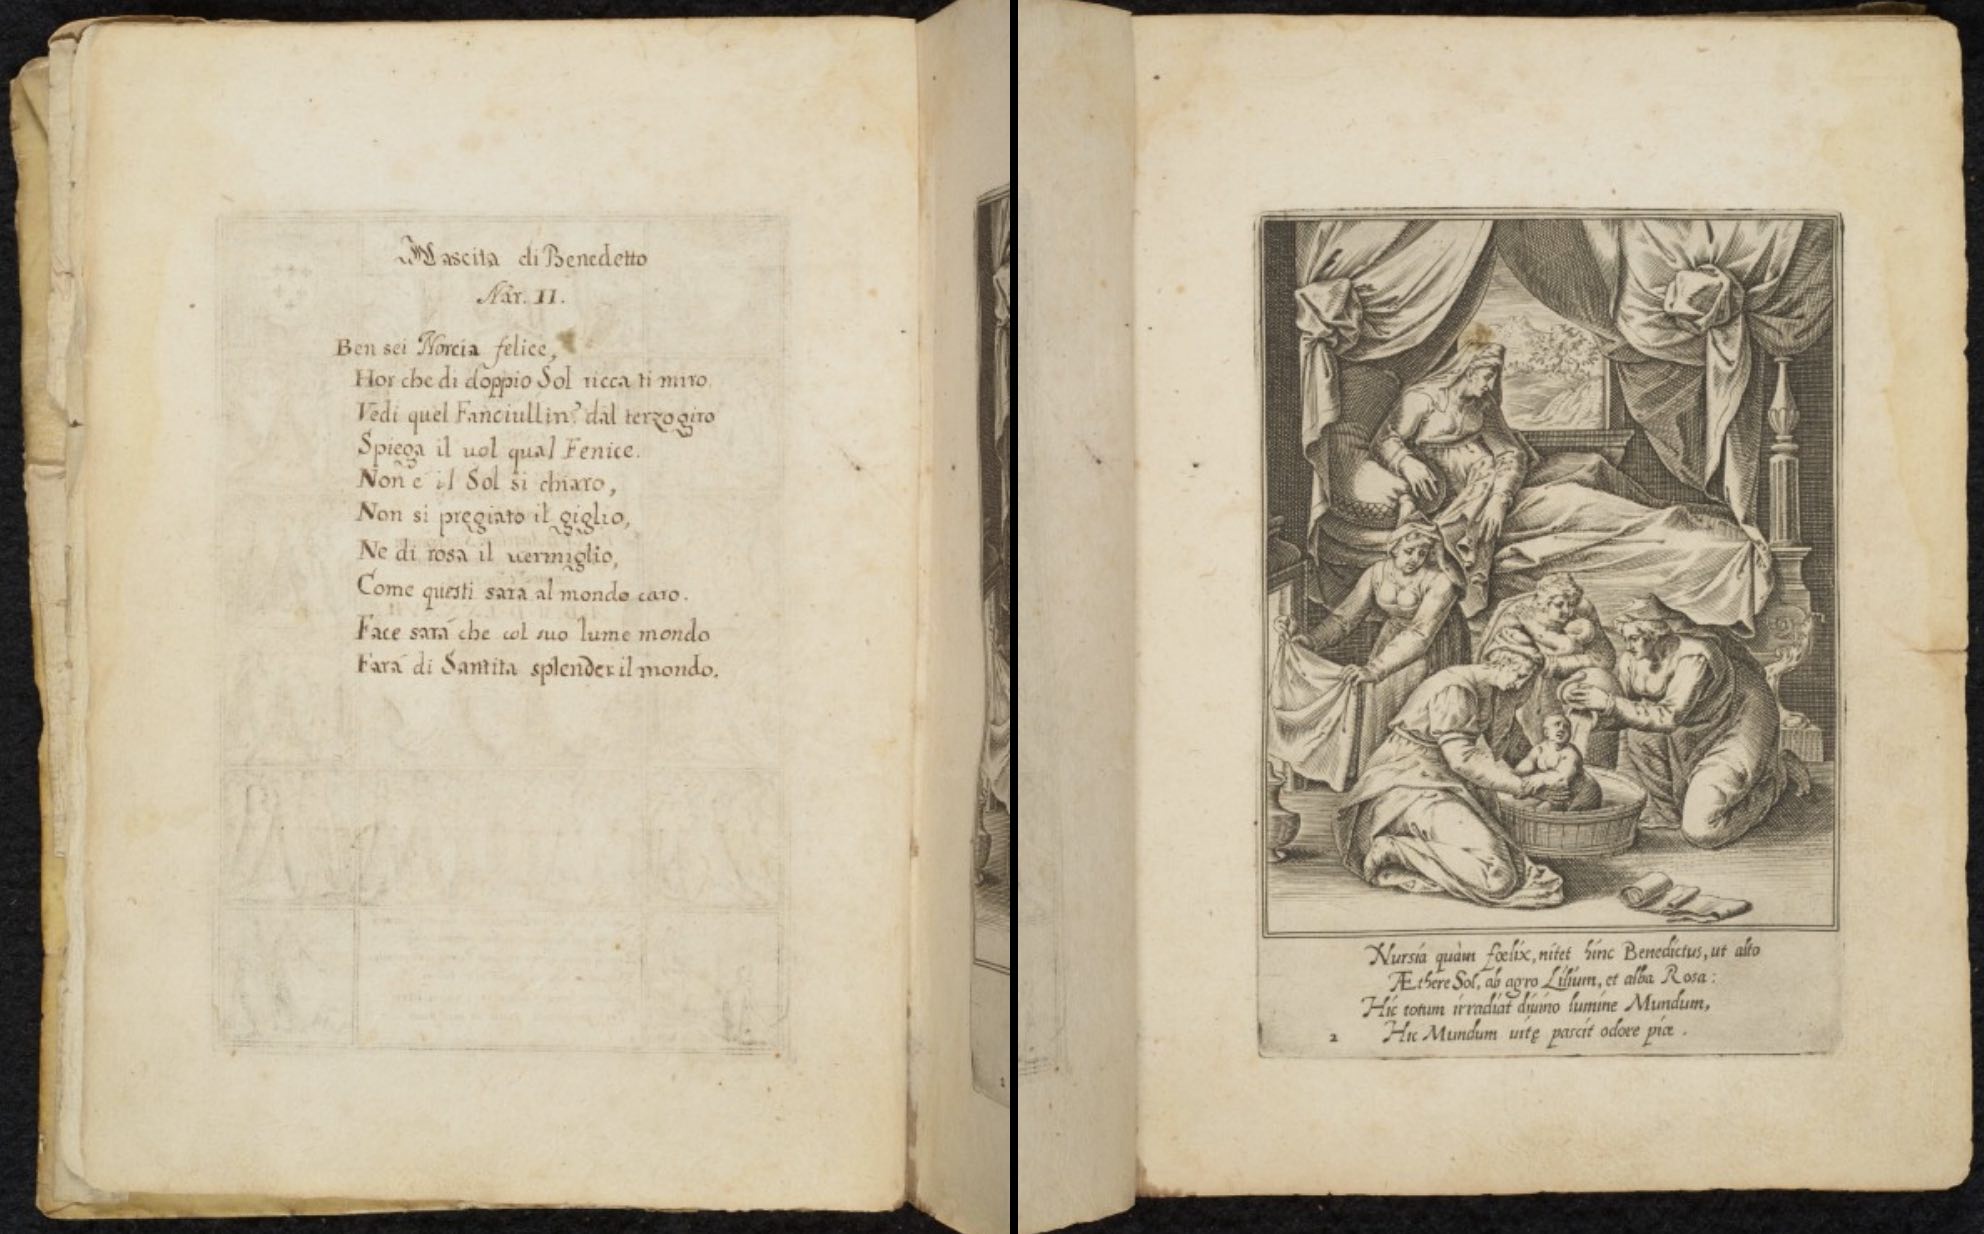 Life of St. Benedict by Angelo Faggi [Latin with Italian]<br>Rome, 1587 and later